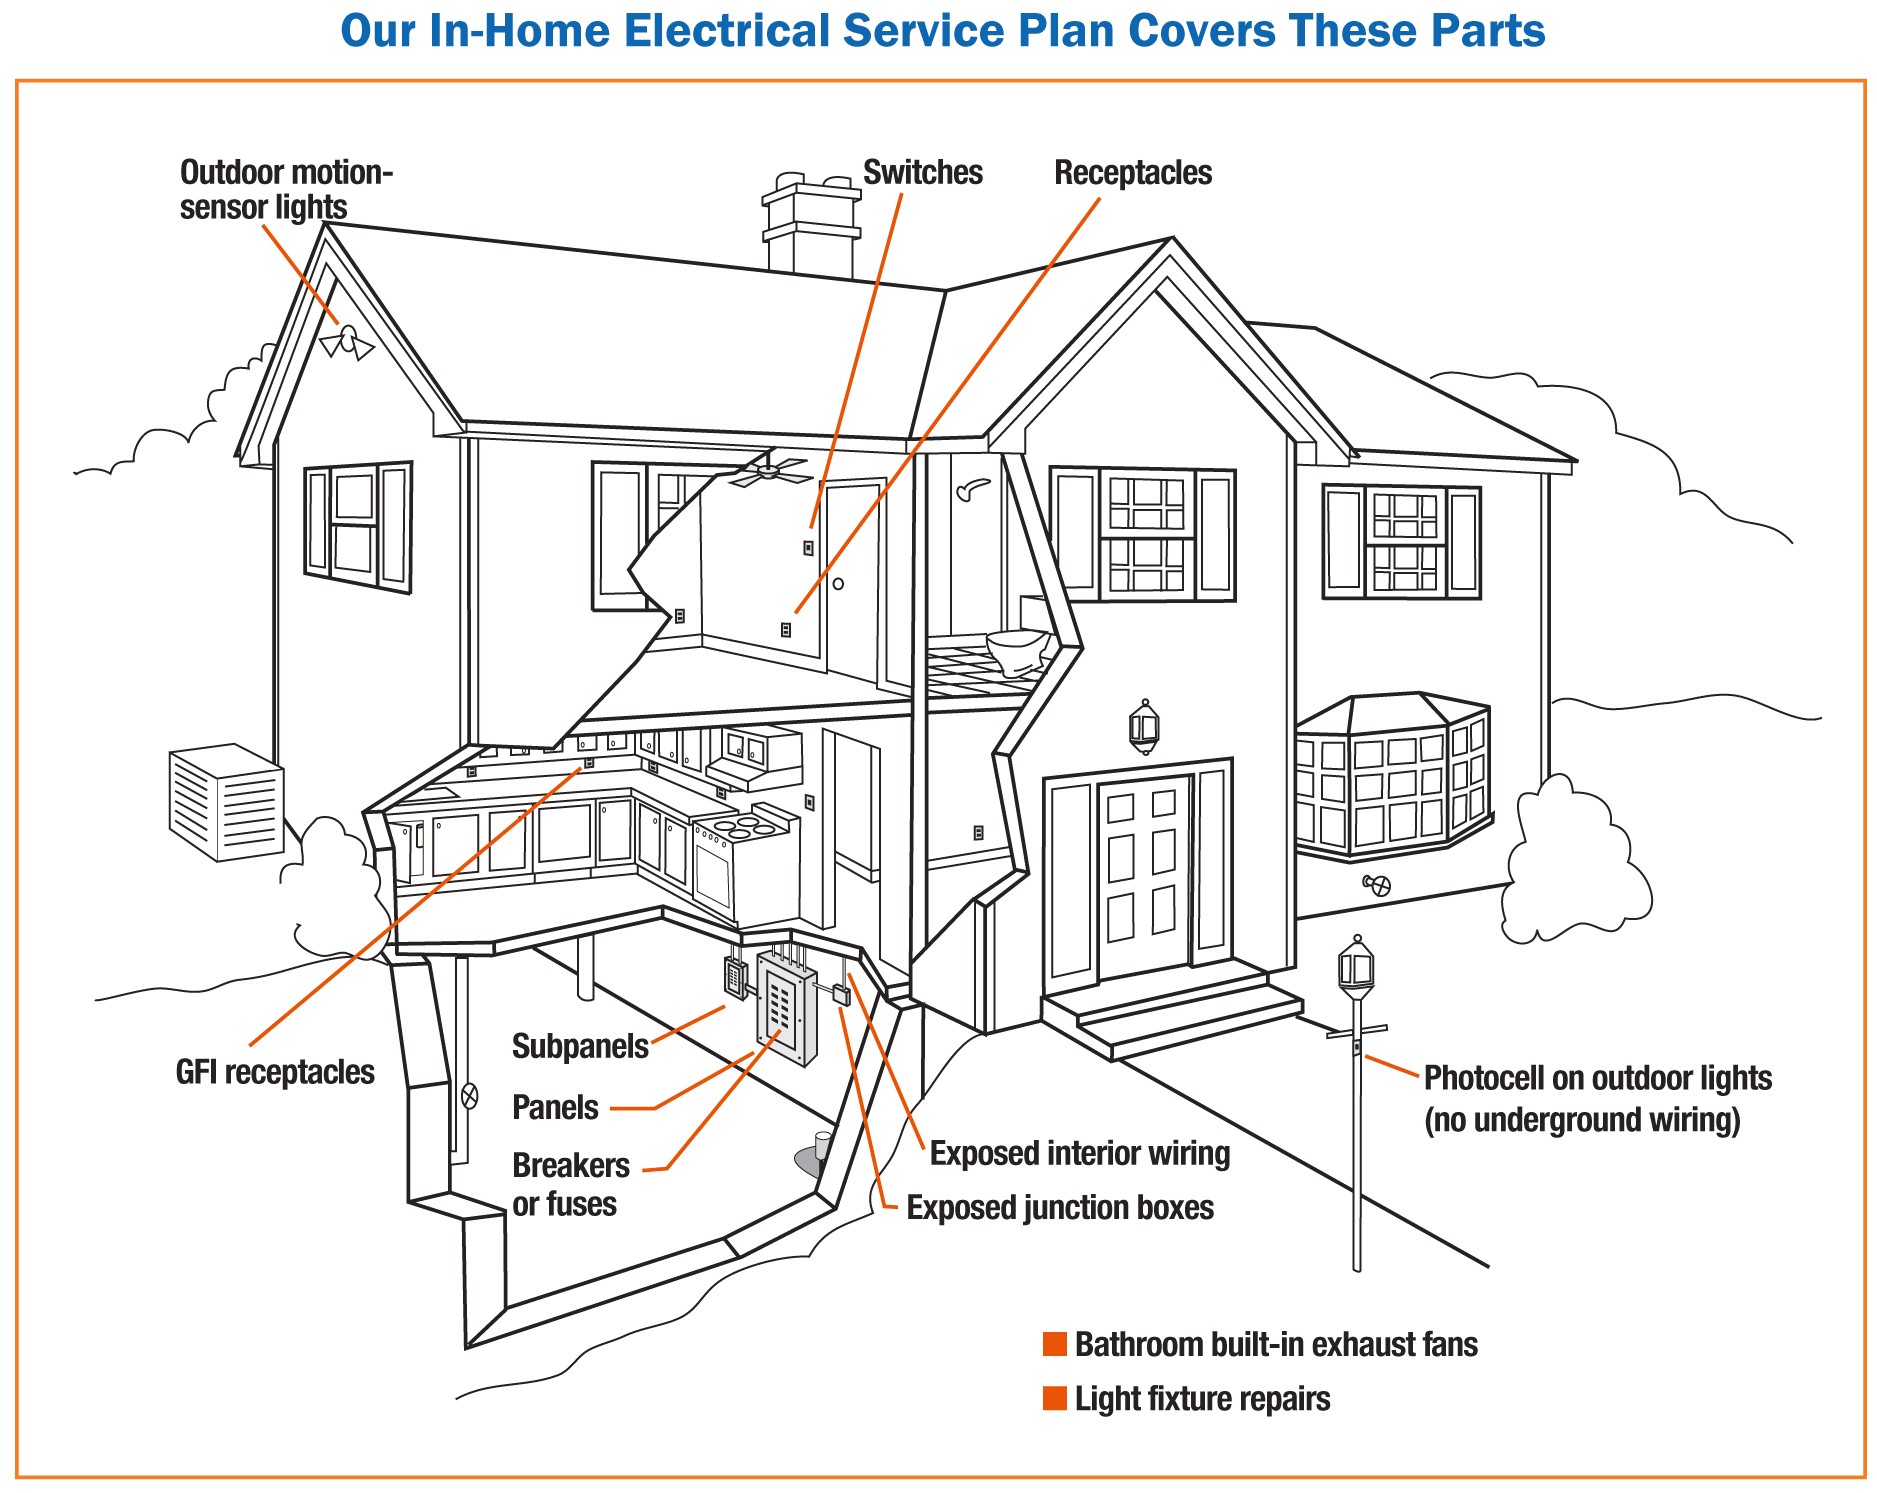 bge home service plan cost